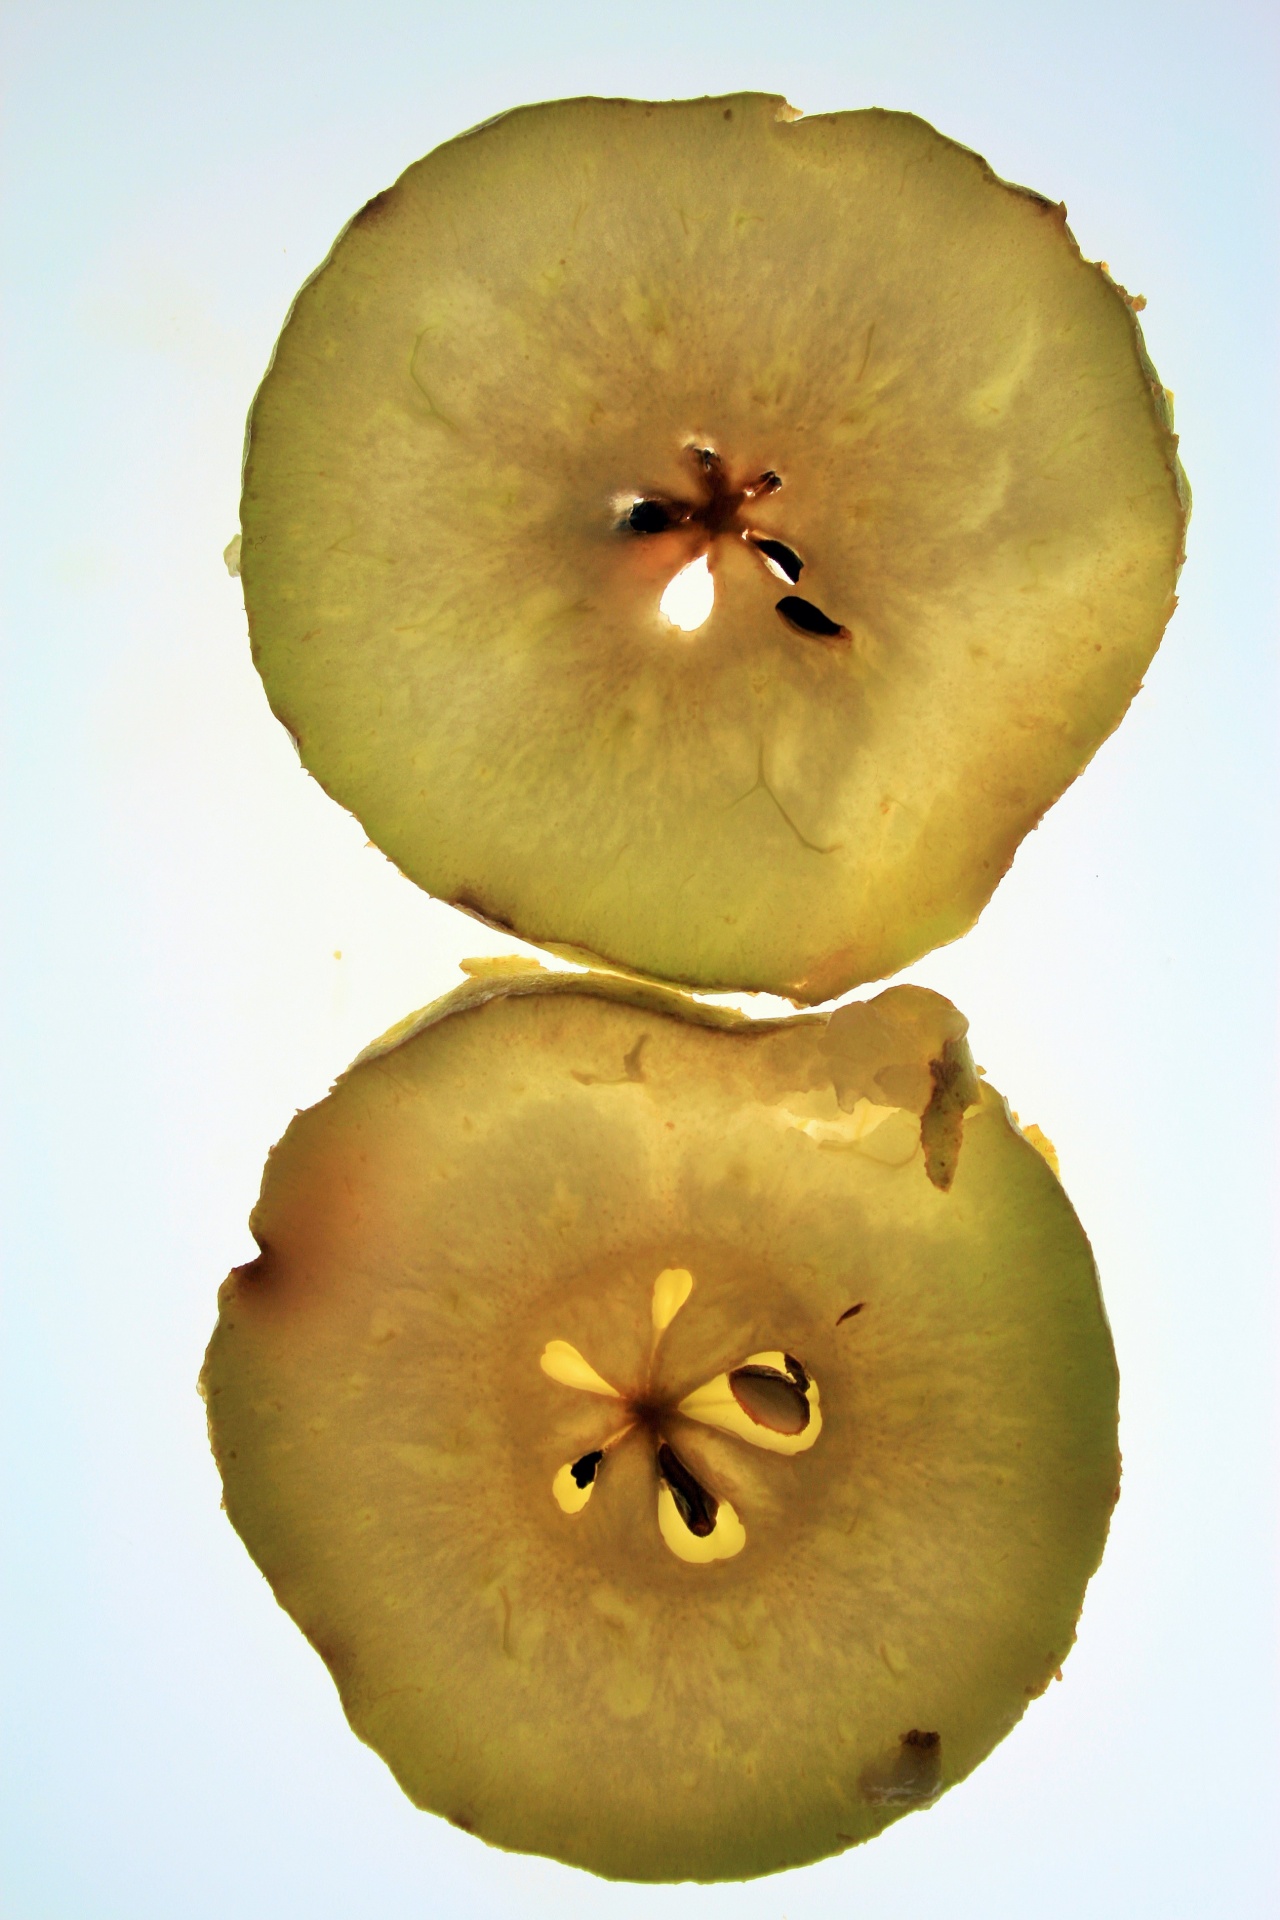 fruit slices pear free photo